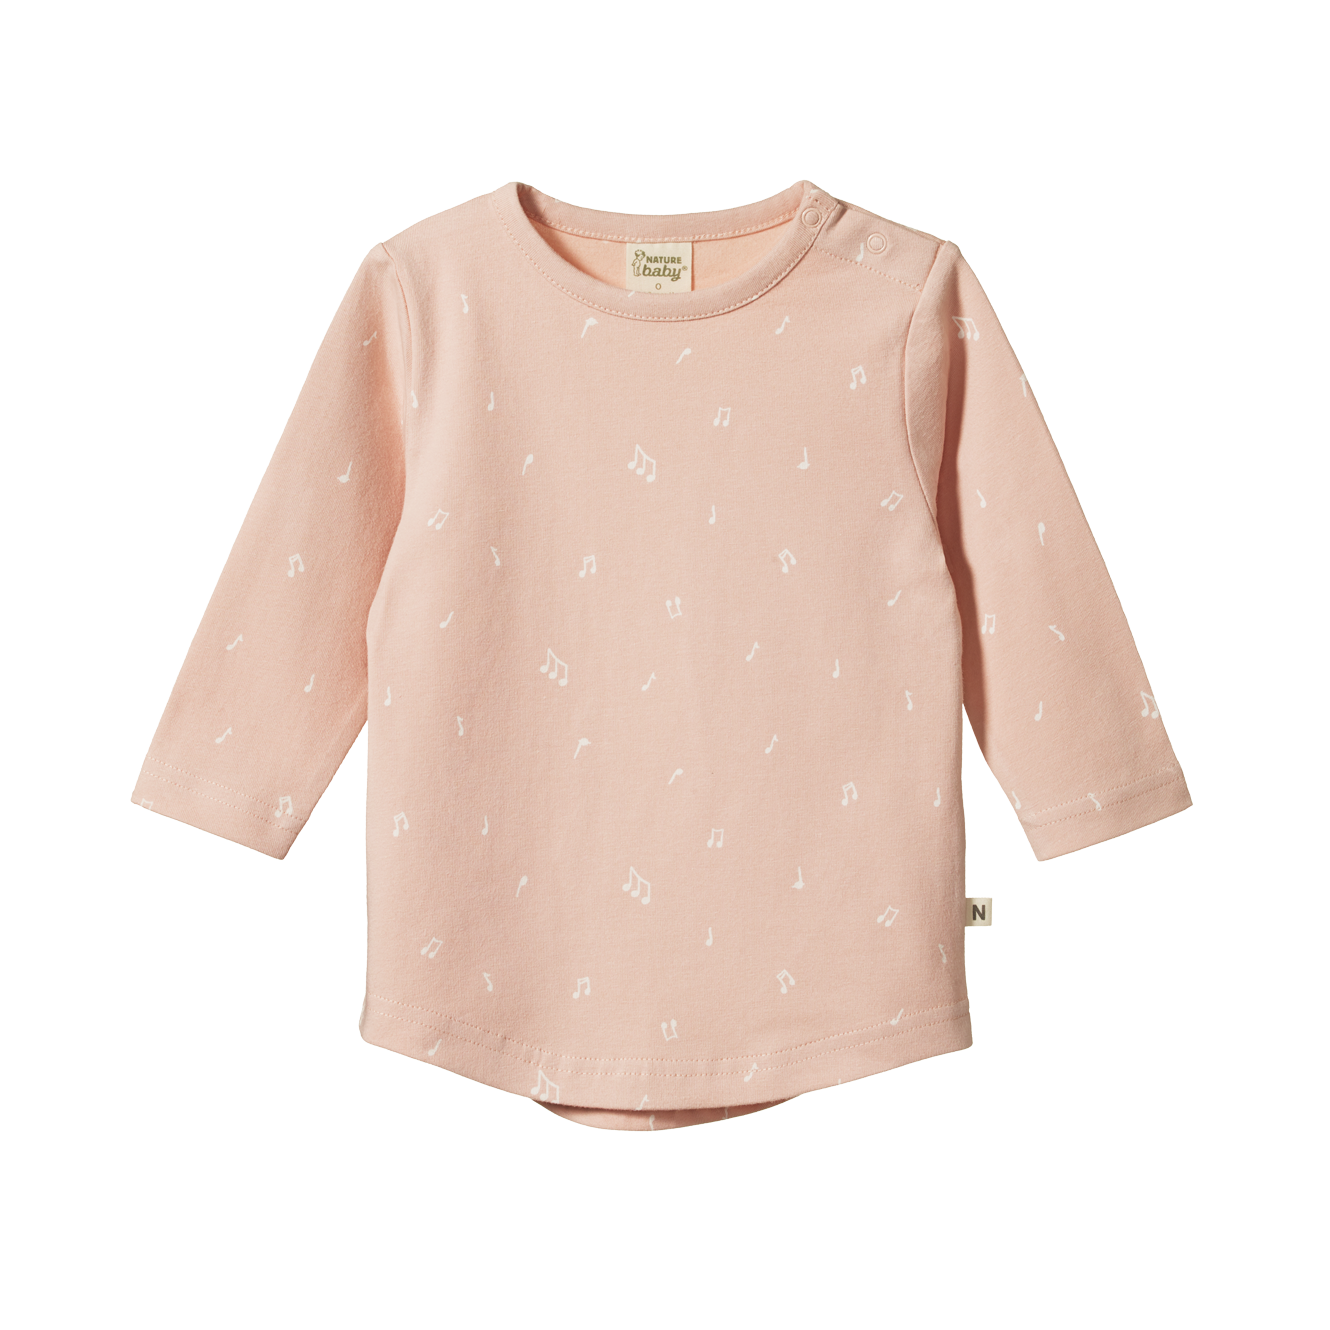 Nature Baby - Everyday Tee - Melody Print